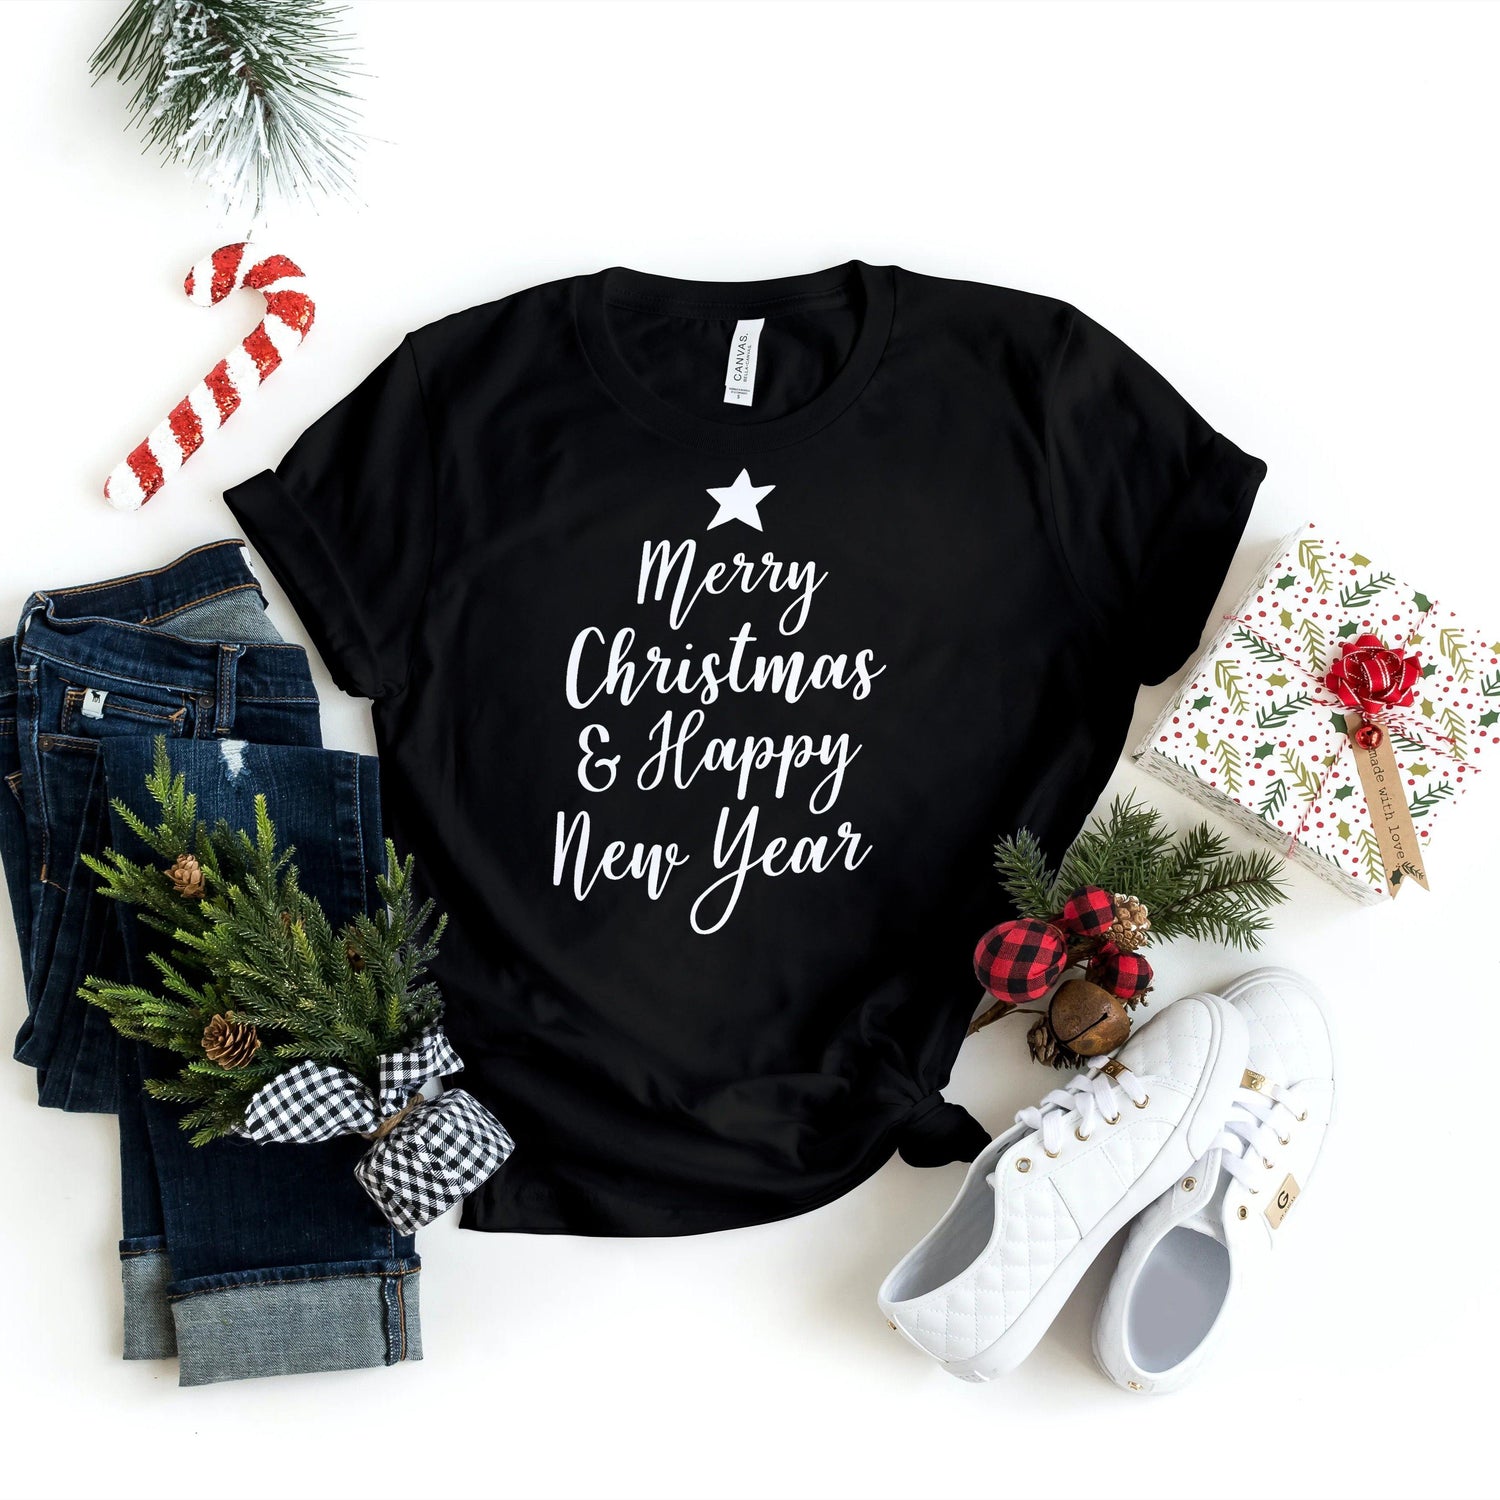 Christmas Shirts - Merry Christmas & Happy New Year - Holiday Shirts - Gifts - Healthy Wealthy Skinny